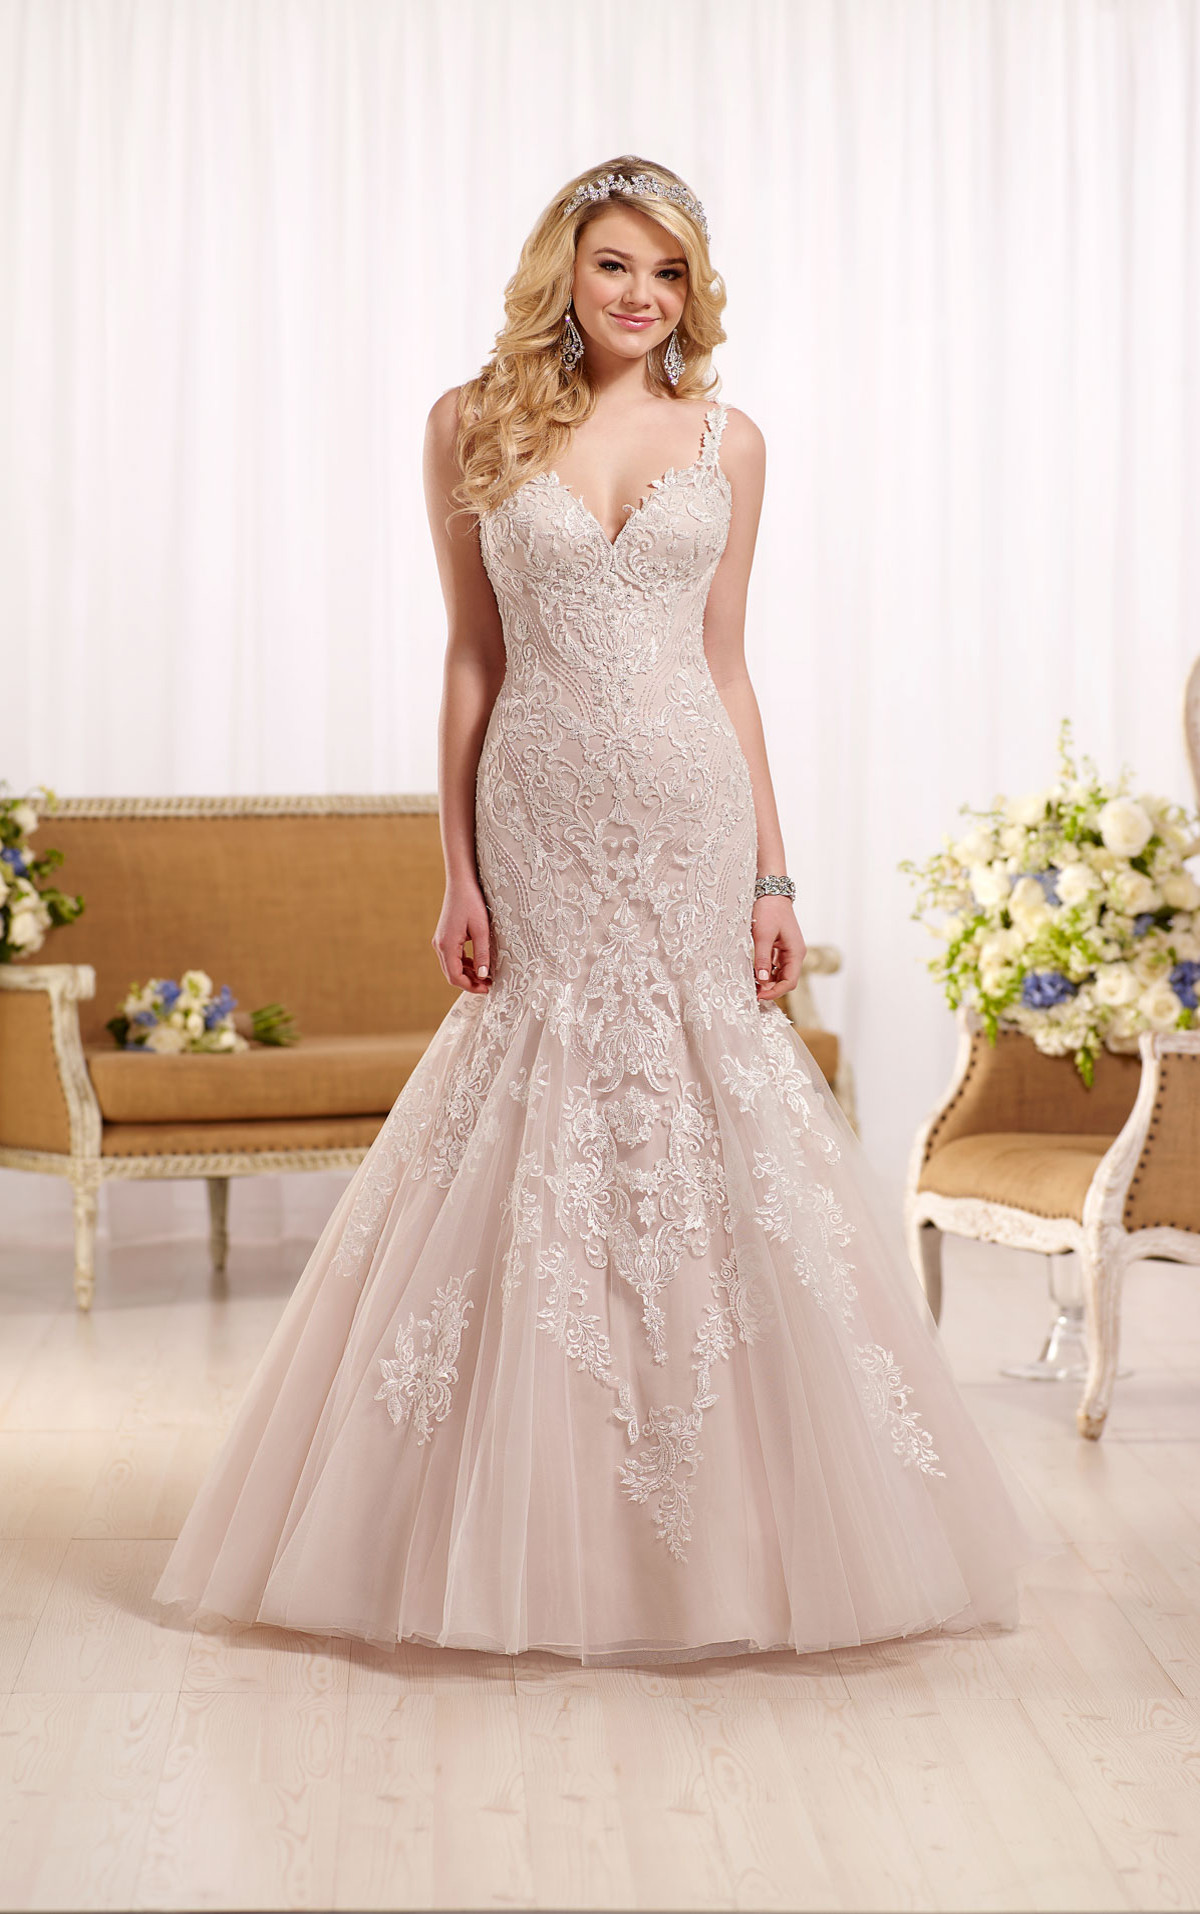 Low Cut Wedding Dresses
 Fit and Flare Wedding Dress with Low Cut Back